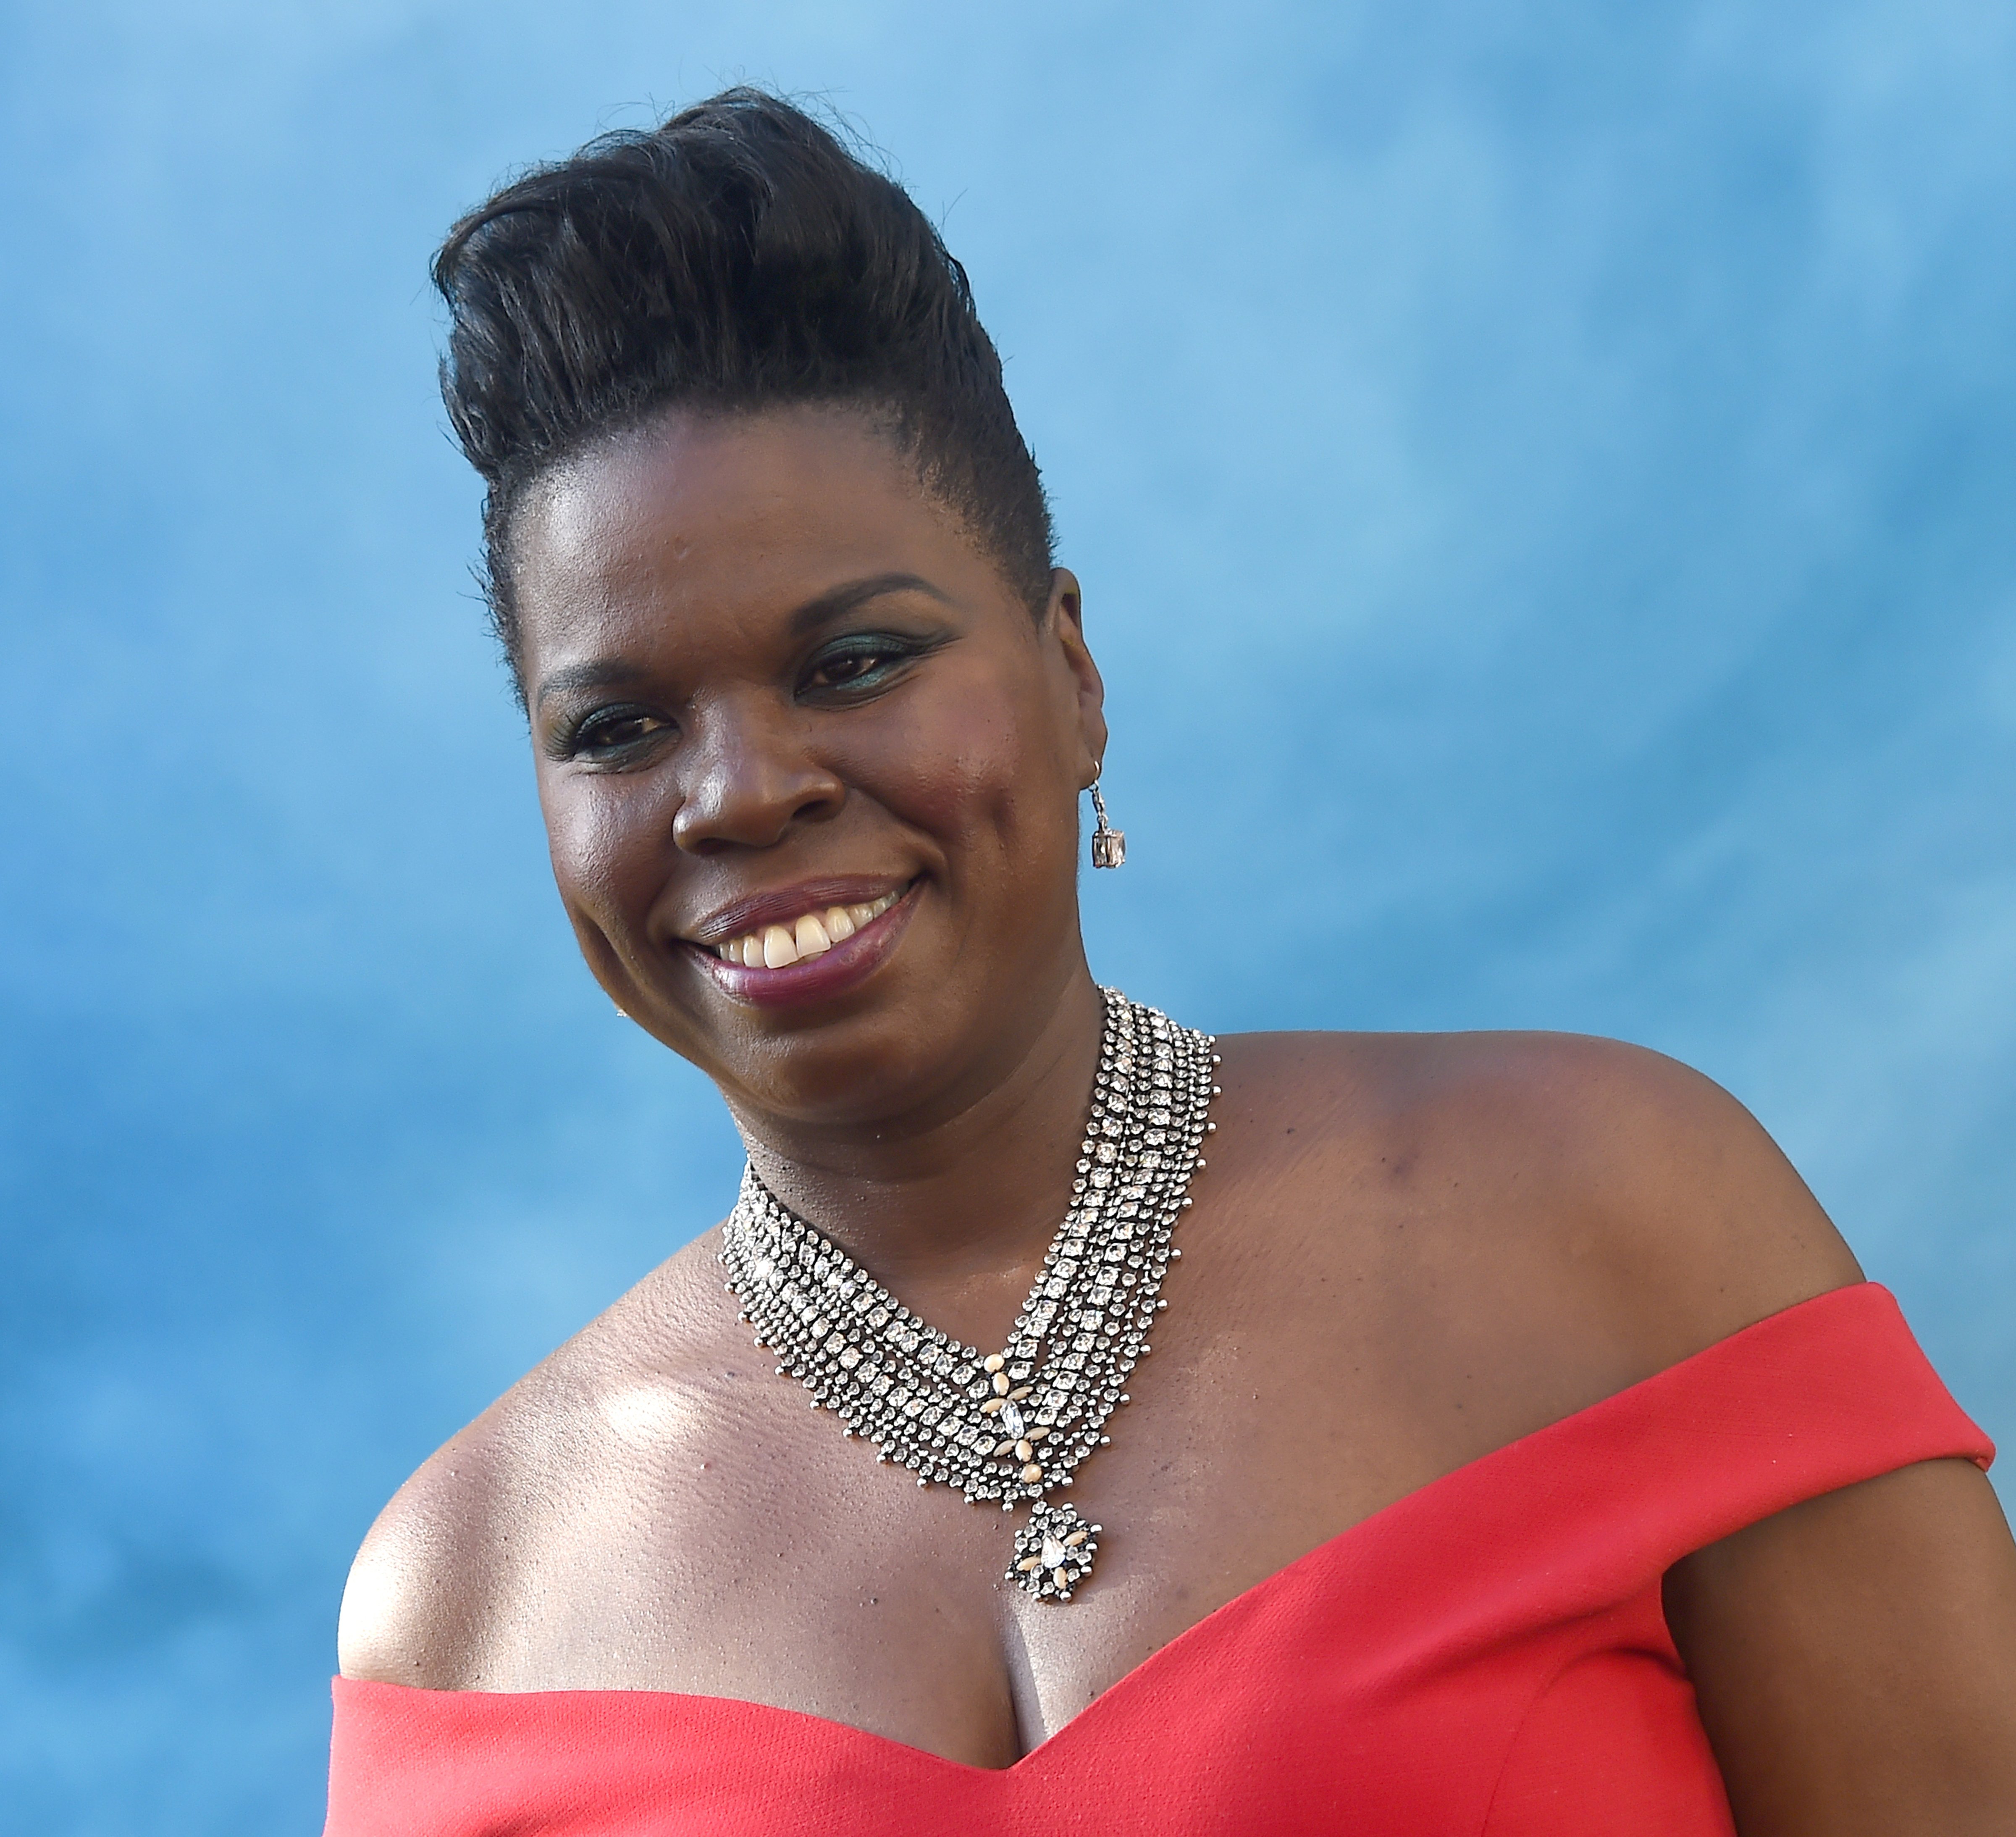 Actress/comedian Leslie Jones arrives at the premiere of Sony Pictures' "Ghostbusters" at TCL Chinese Theatre on July 9, 2016 in Hollywood, California. (Gregg DeGuire—WireImage/Getty Images)